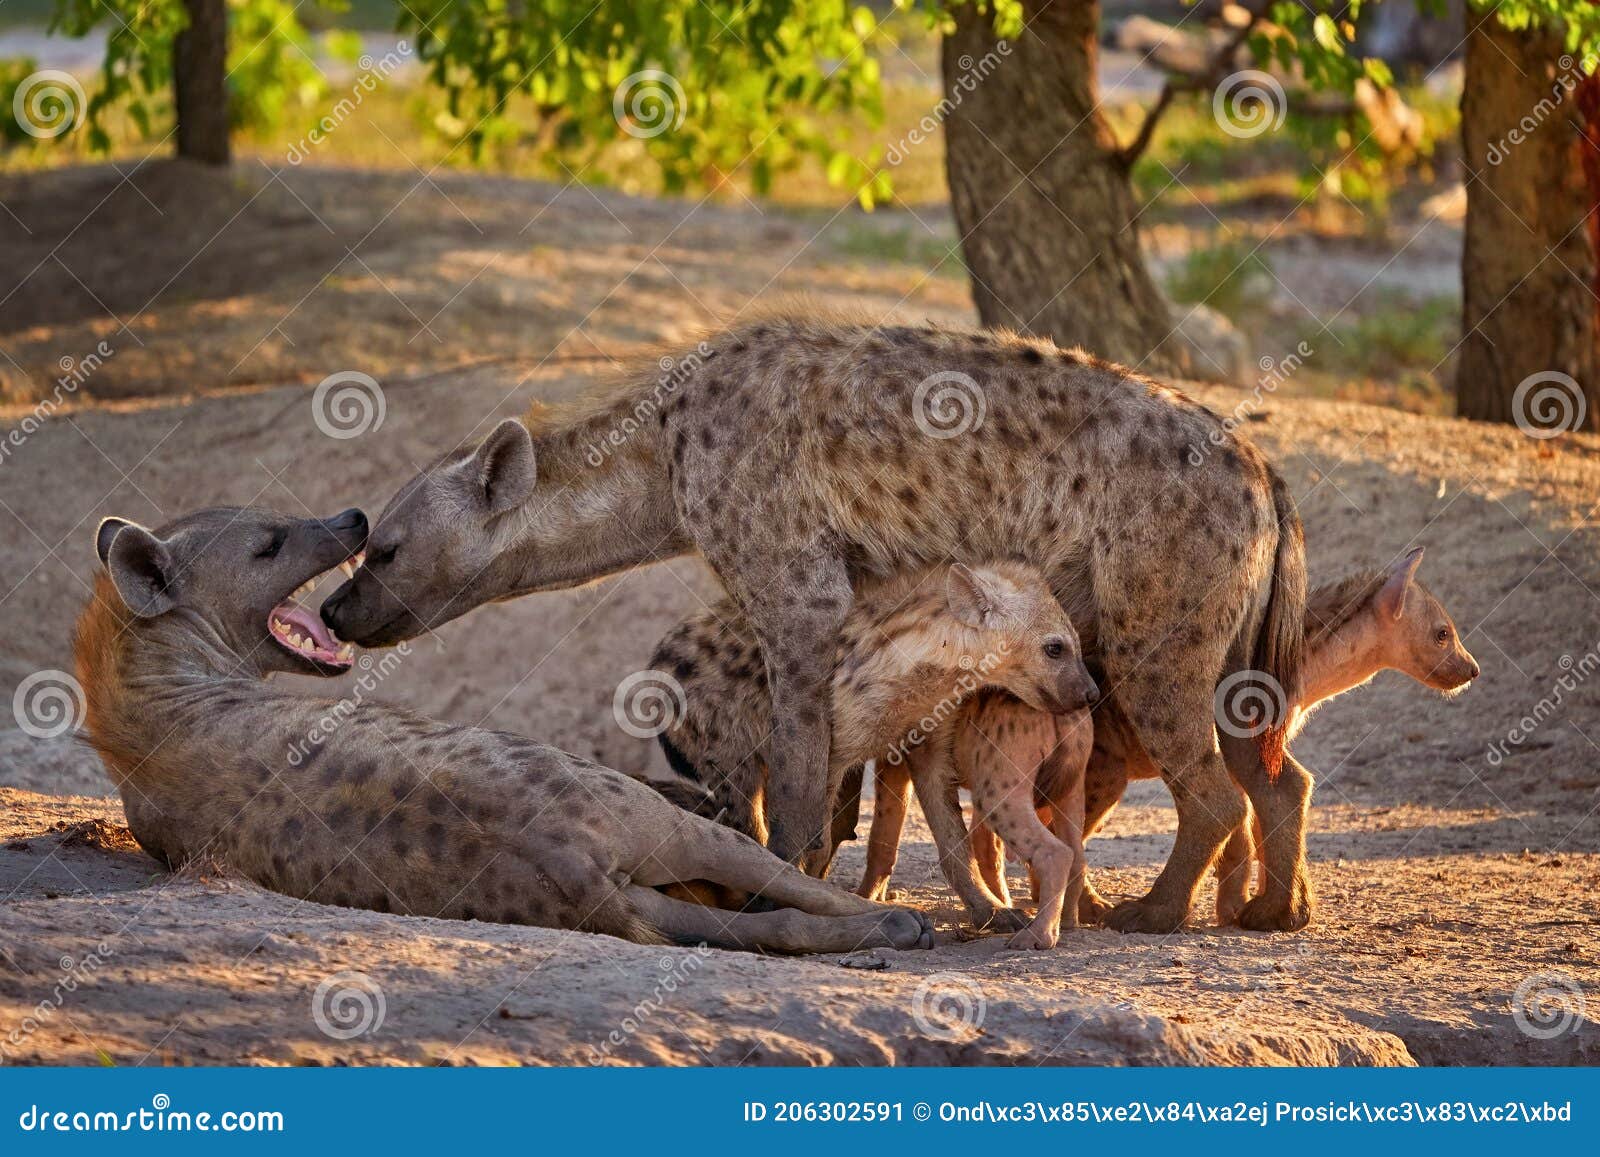 Family in the Nature. Hyena Evening Sunset Light. Hyena, Detail Portrait  Stock Image - Image of food, mane: 206302591